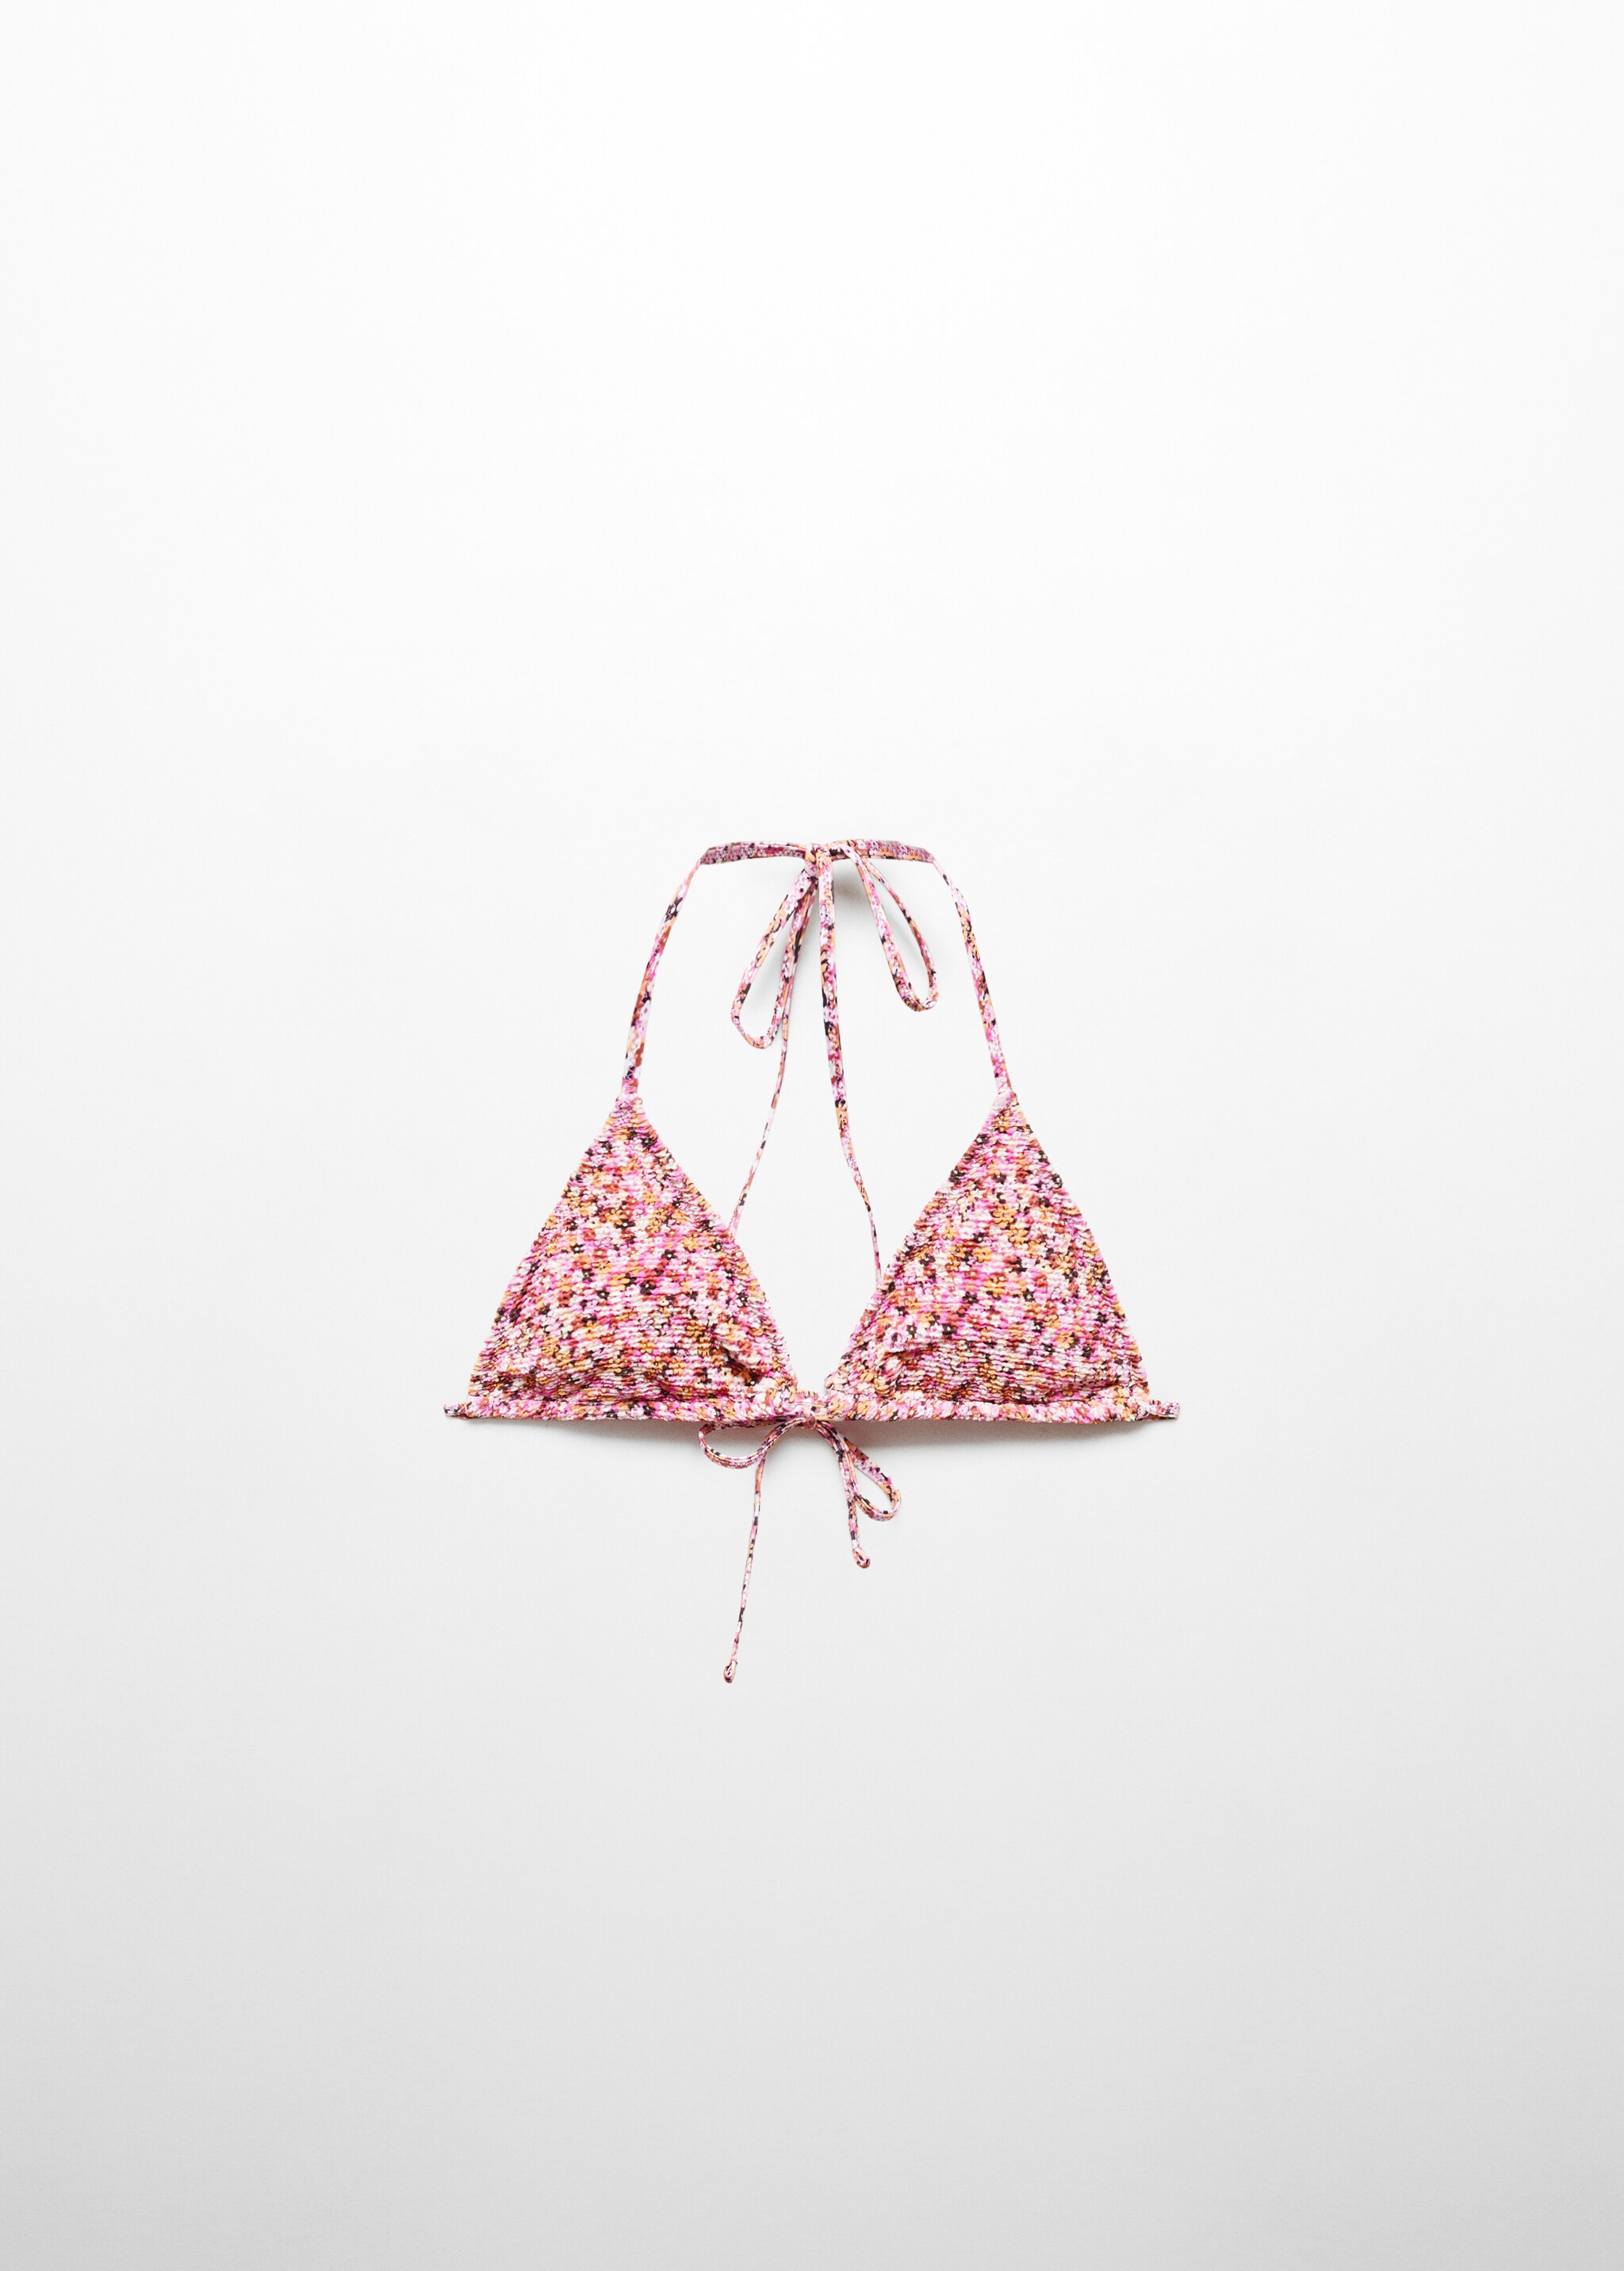 Floral triangular bikini top - Article without model